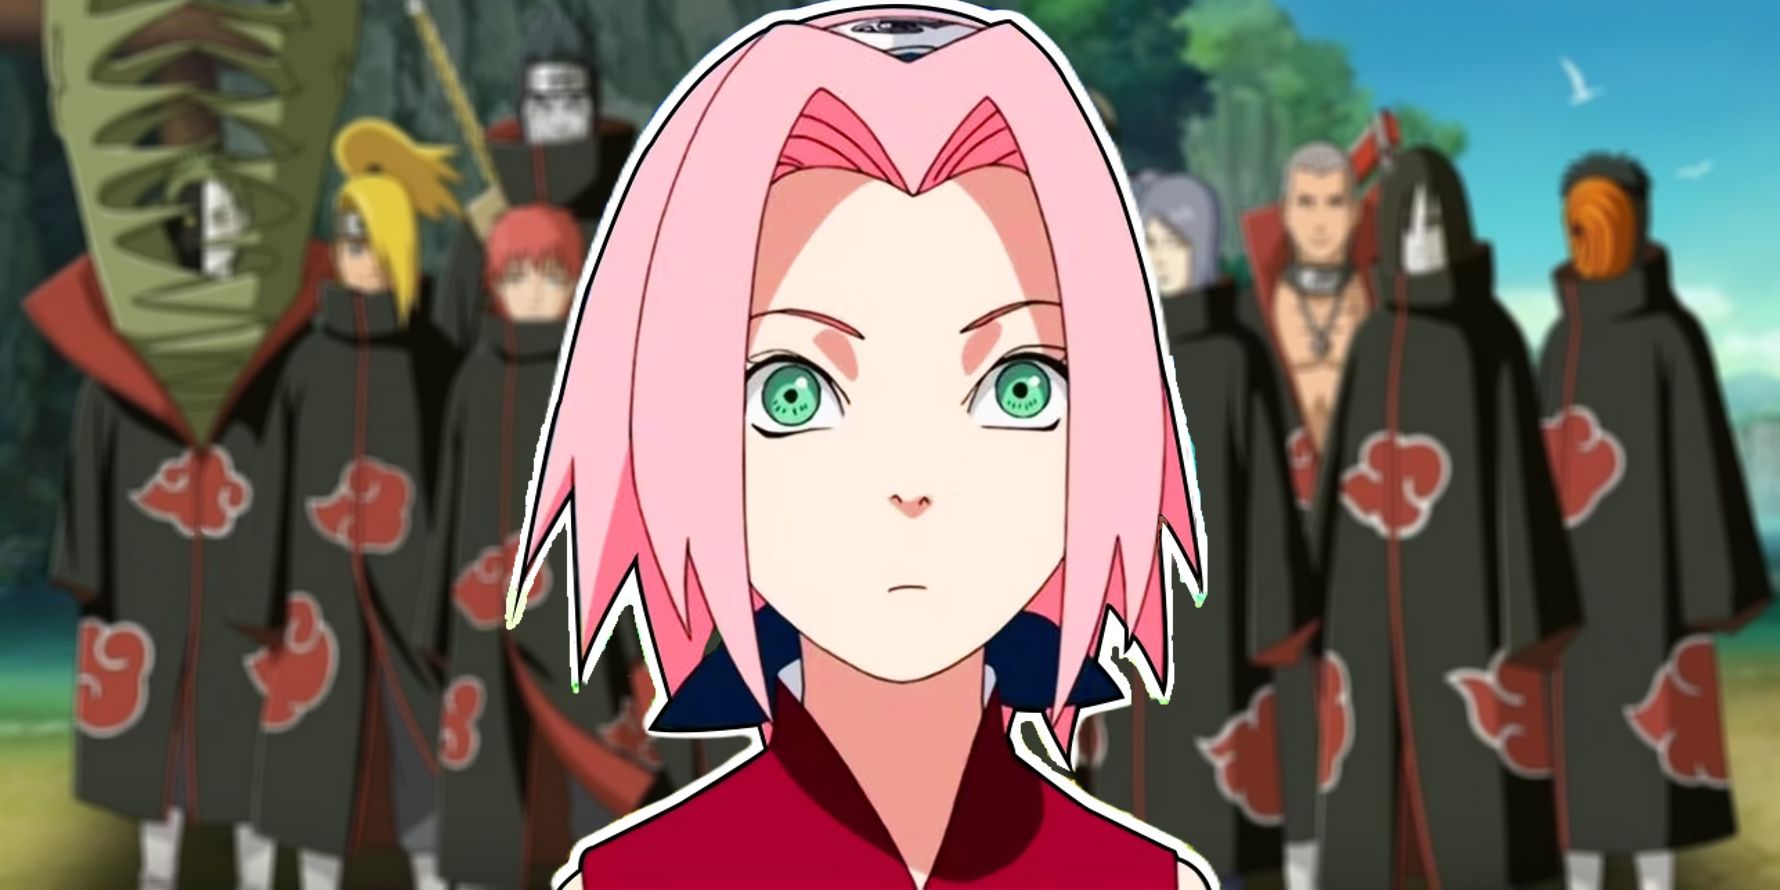 Naruto's Sakura stands in front of the assmbled Akatsuki team